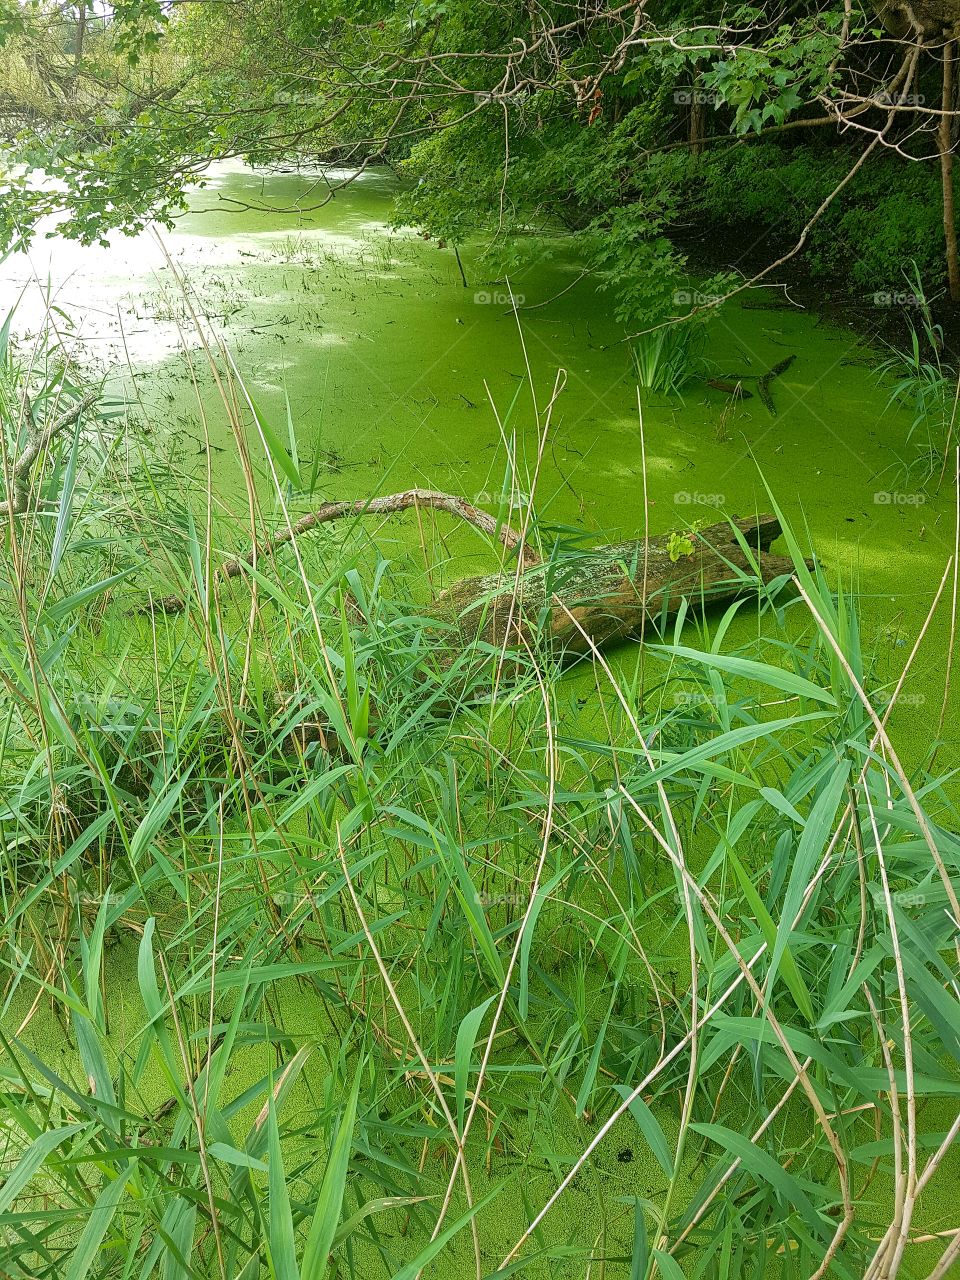 A log floats in a vibrant green swamp.